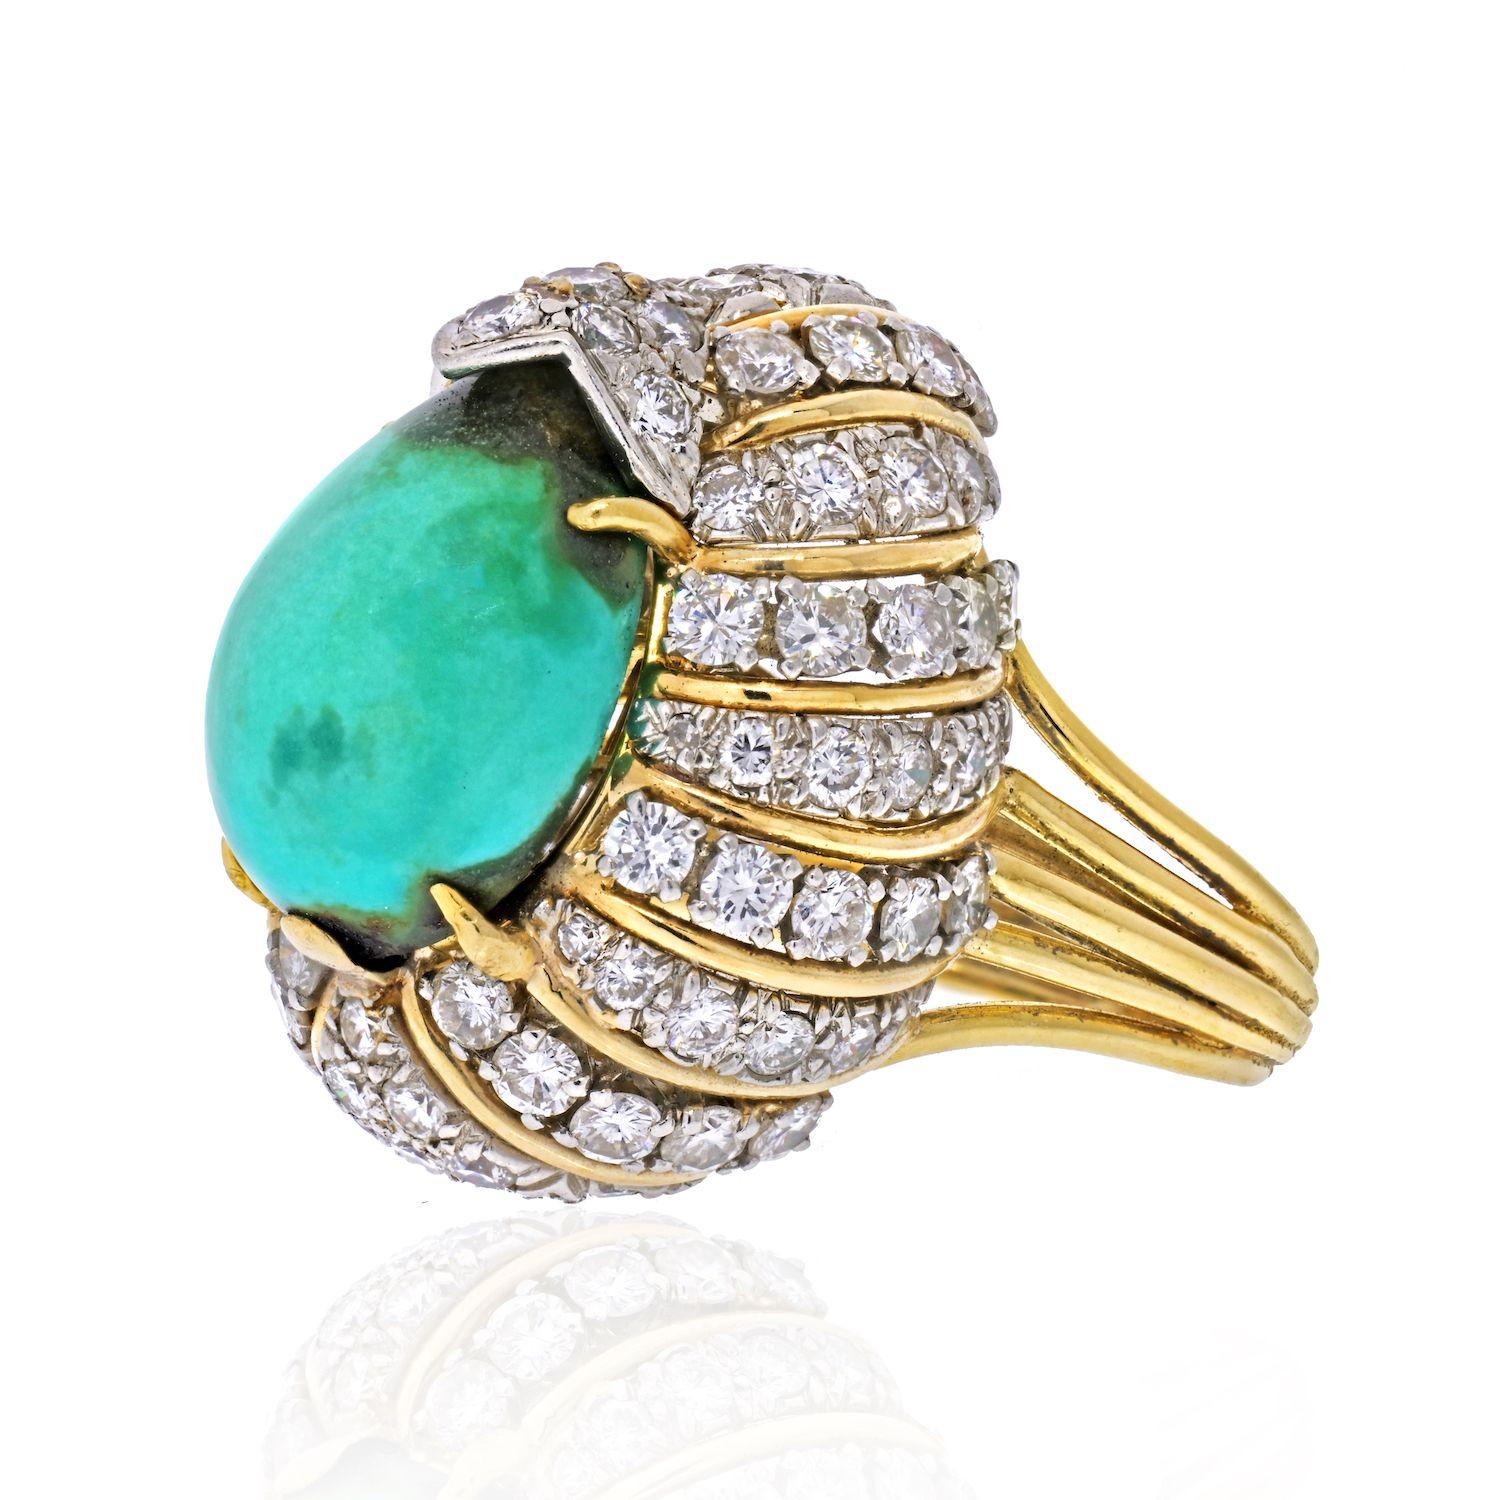 A vintage David Webb platinum and 18K yellow gold pear shape cabochon turquoise ring with round brilliant-cut diamonds. Circa 1970. Turquoise shows signs of discoloration. Please review pictures. 
Turquoise: 15 cts approx.
Diamonds: 1.75 approx.